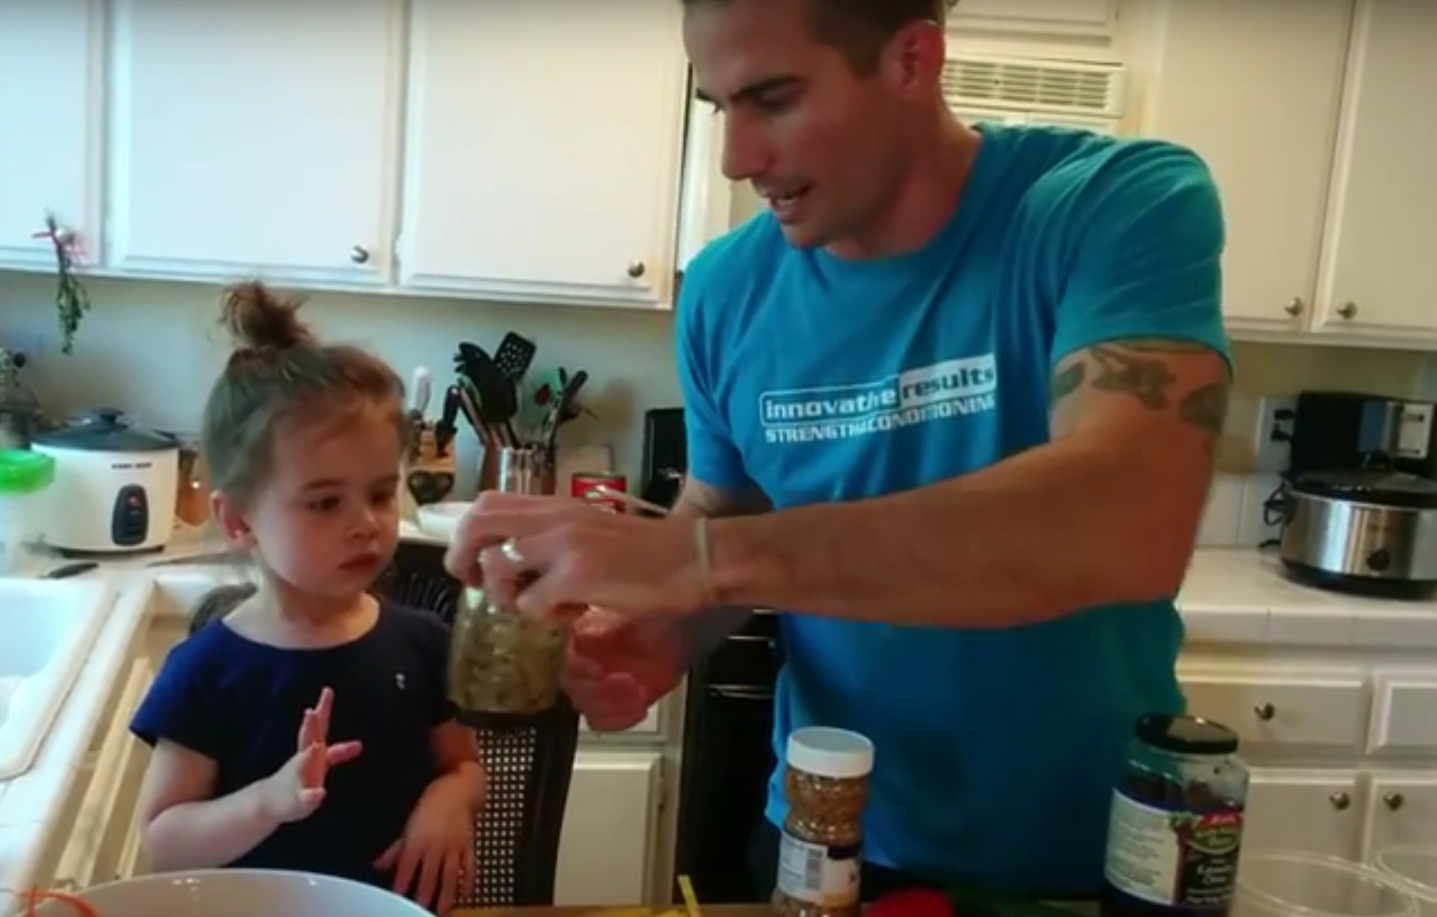 Coach Aaron Explains Nutrition Shopping, Cooking, and Preparing with His Daughter